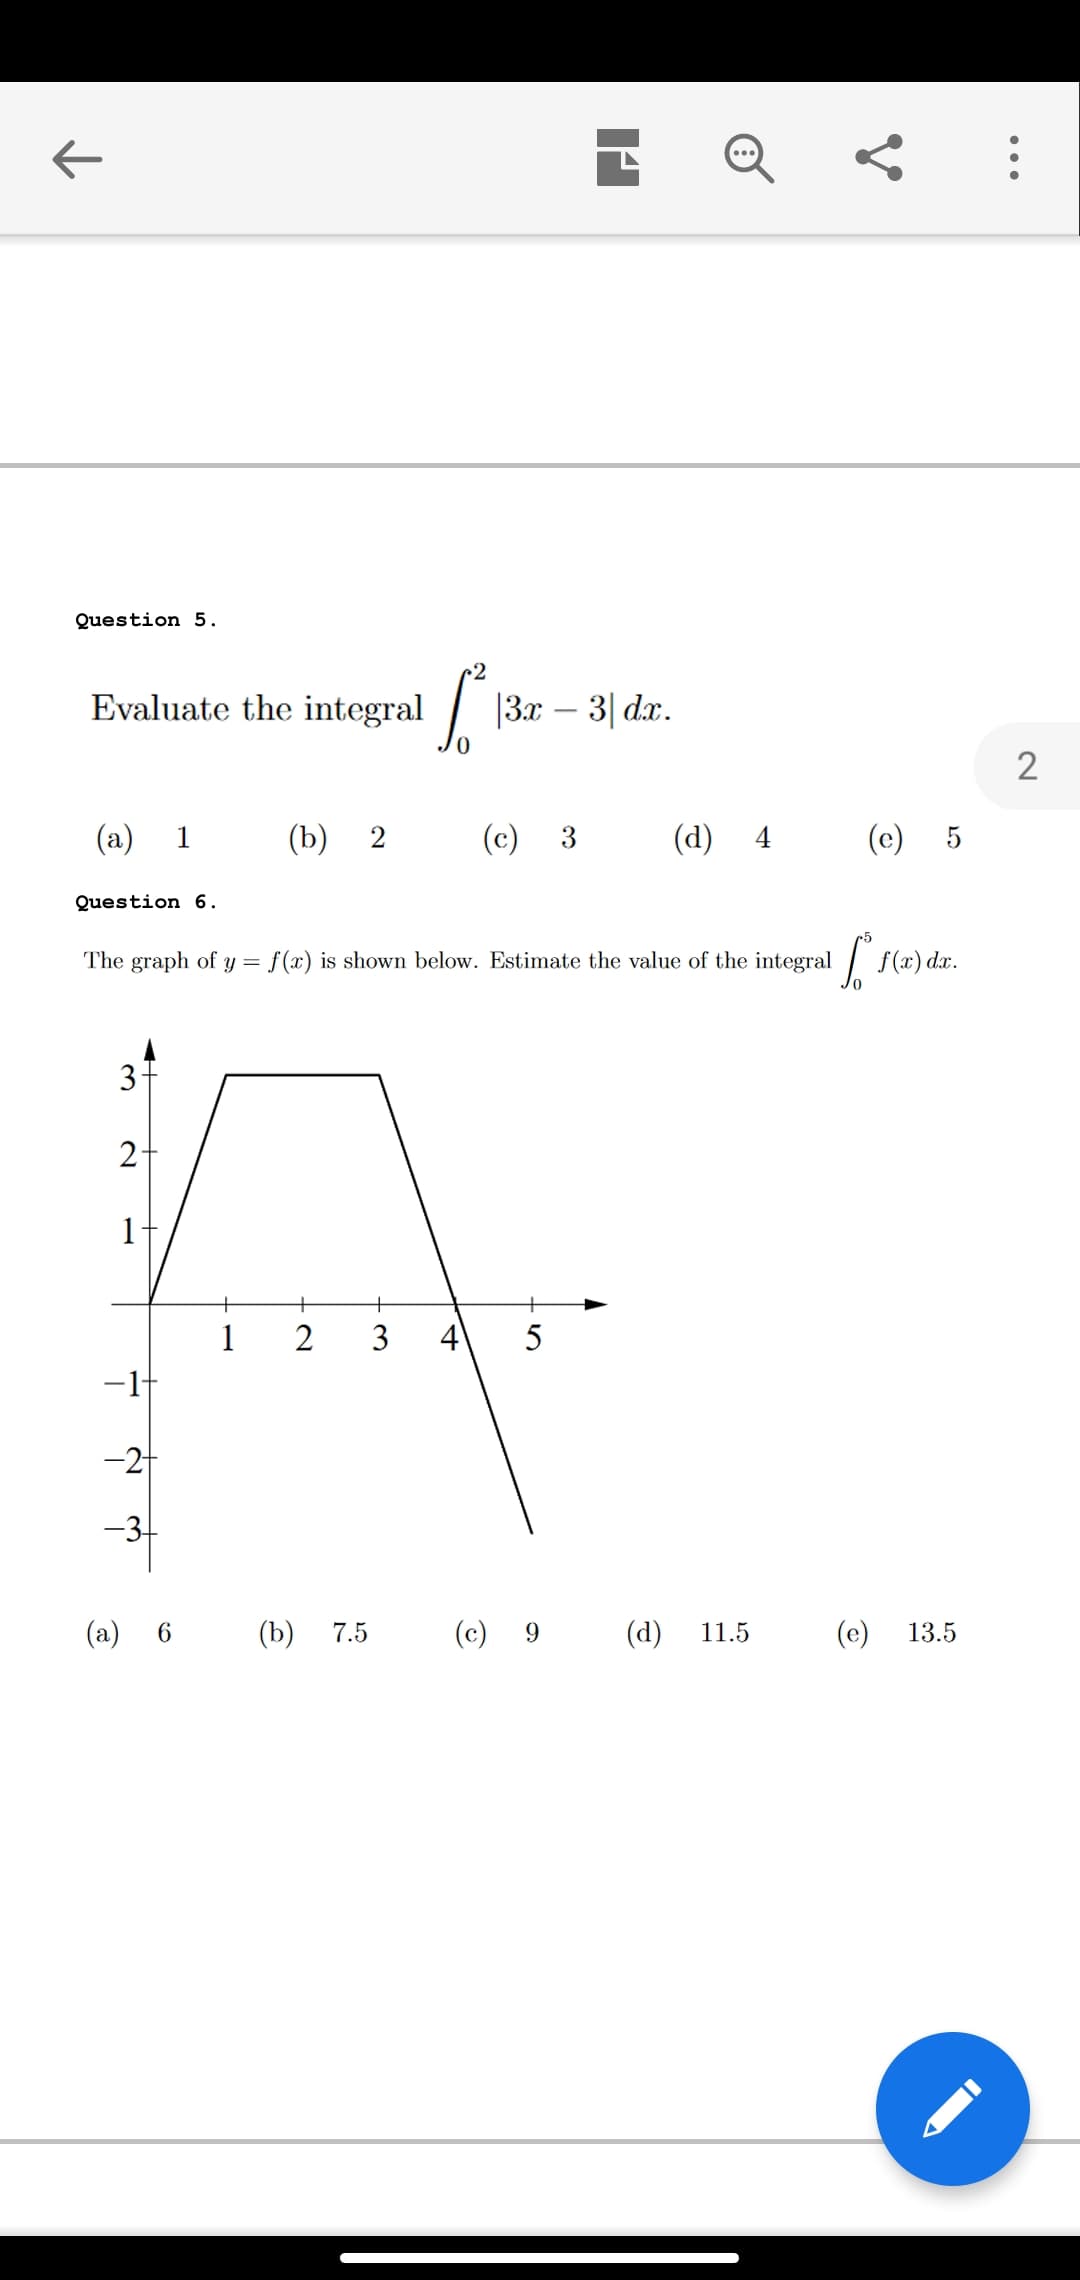 Question 5.
2
Evaluate the integral
|3x – 3| dx.
(a)
1
(b) 2
(c)
3
(d) 4
(c)
Question 6.
The graph of y = f(x) is shown below. Estimate the value of the integral f
f(x) dx.
3-
2-
1
+
1
2
3
4
-1-
-2
-3-
(a)
6.
(b)
7.5
(c) 9
(d)
11.5
(e)
13.5
•..
